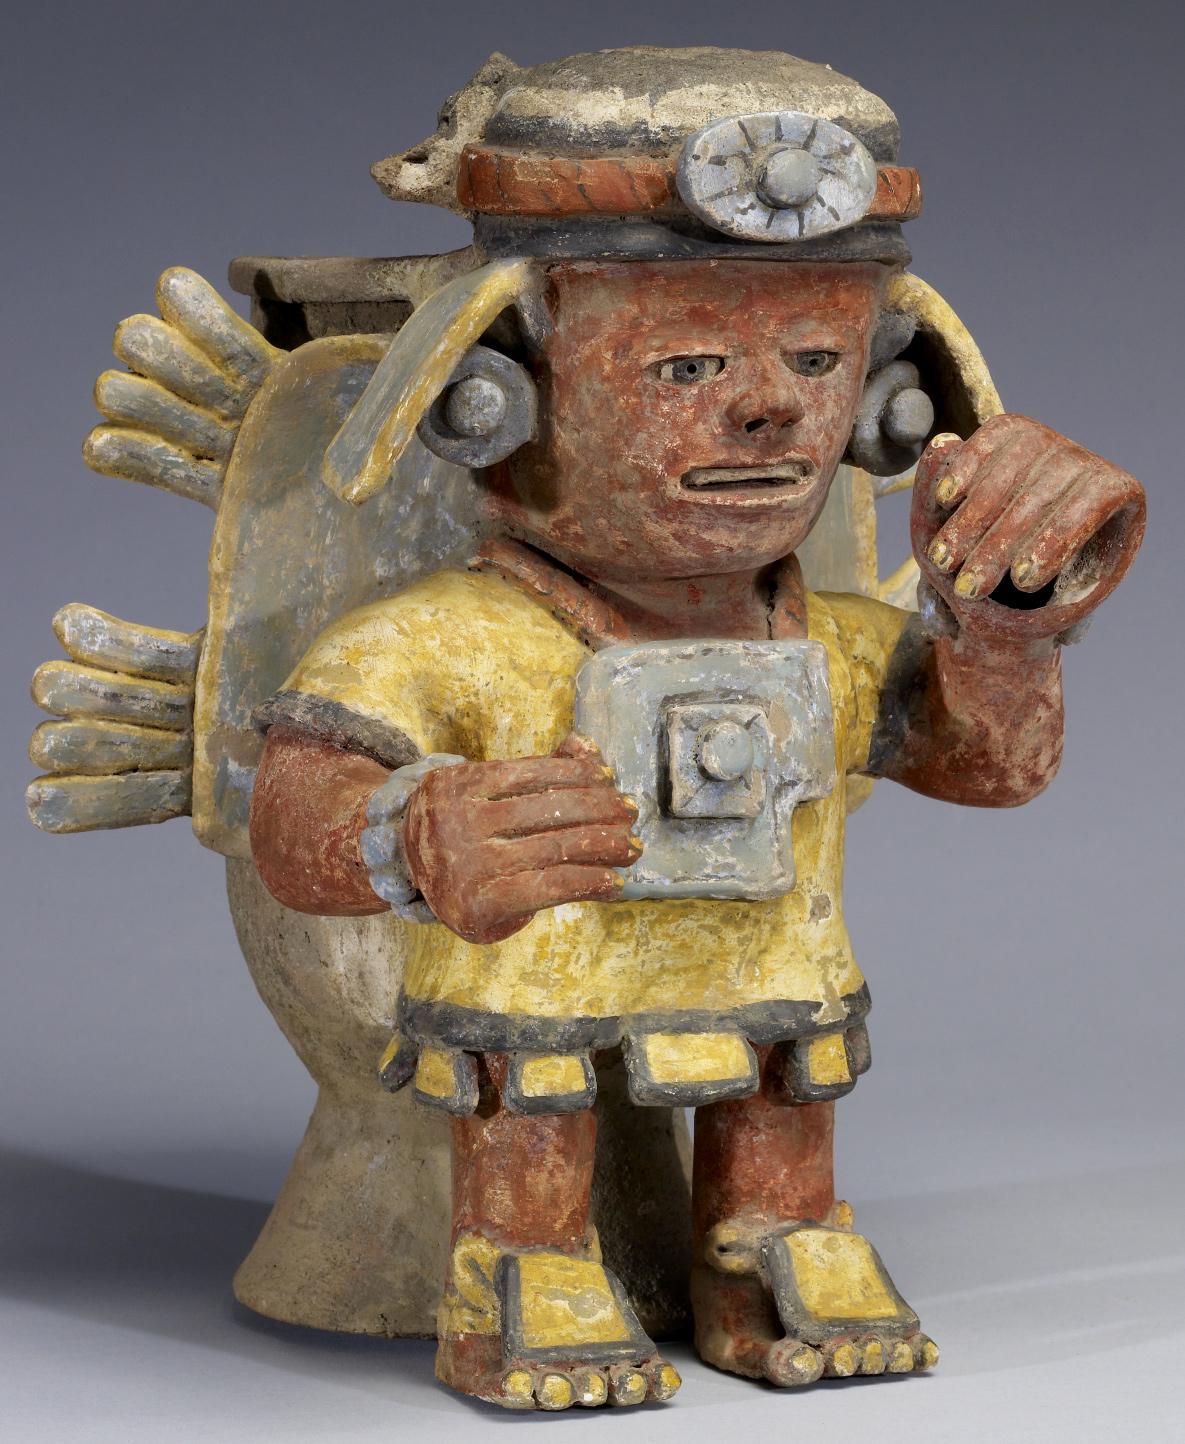 Polychrome standing figure with raised hand. Mexico, Mixtec civilization, 1200-1500 AD.jpg